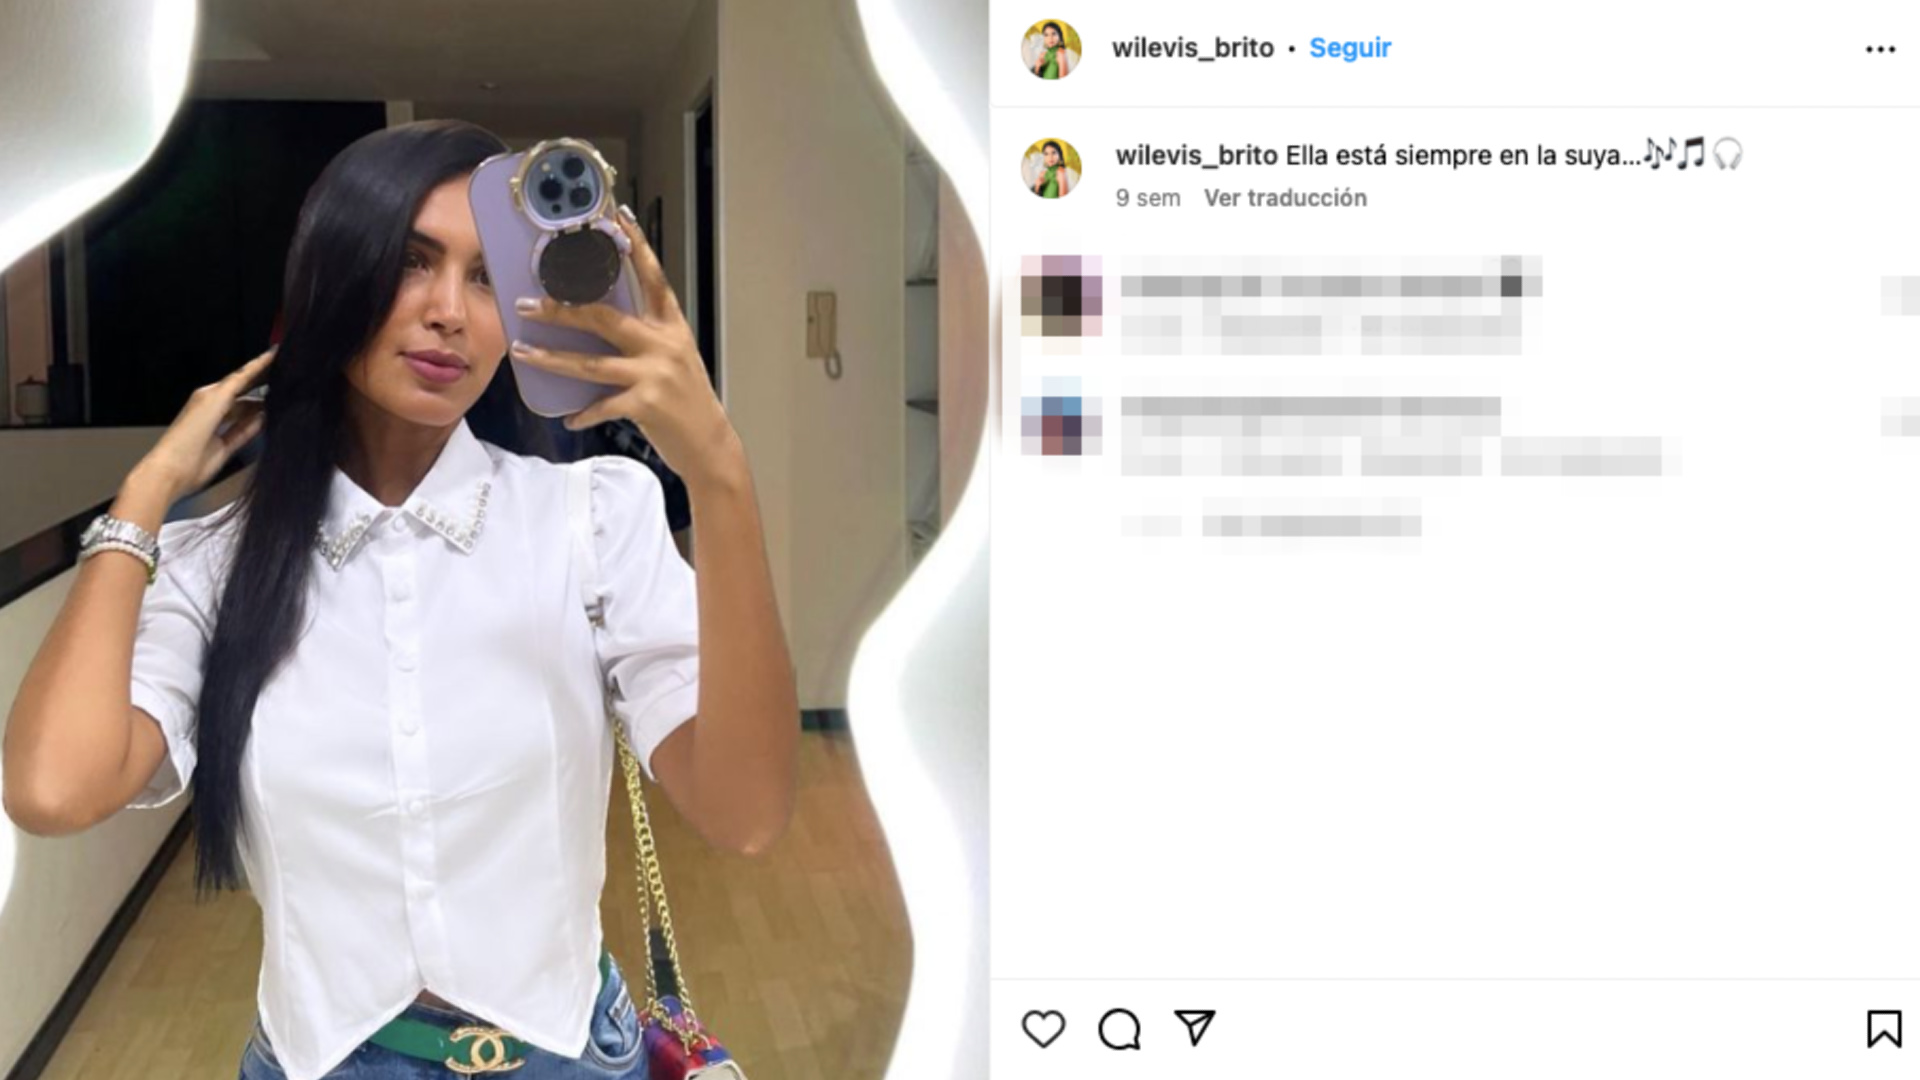 <p>At the age of 24, model Wilevis Brito died in Caracas, Venezuela, due to complications from cosmetic surgery.</p> <p>Photo: wilevis_brito / Instagram</p>